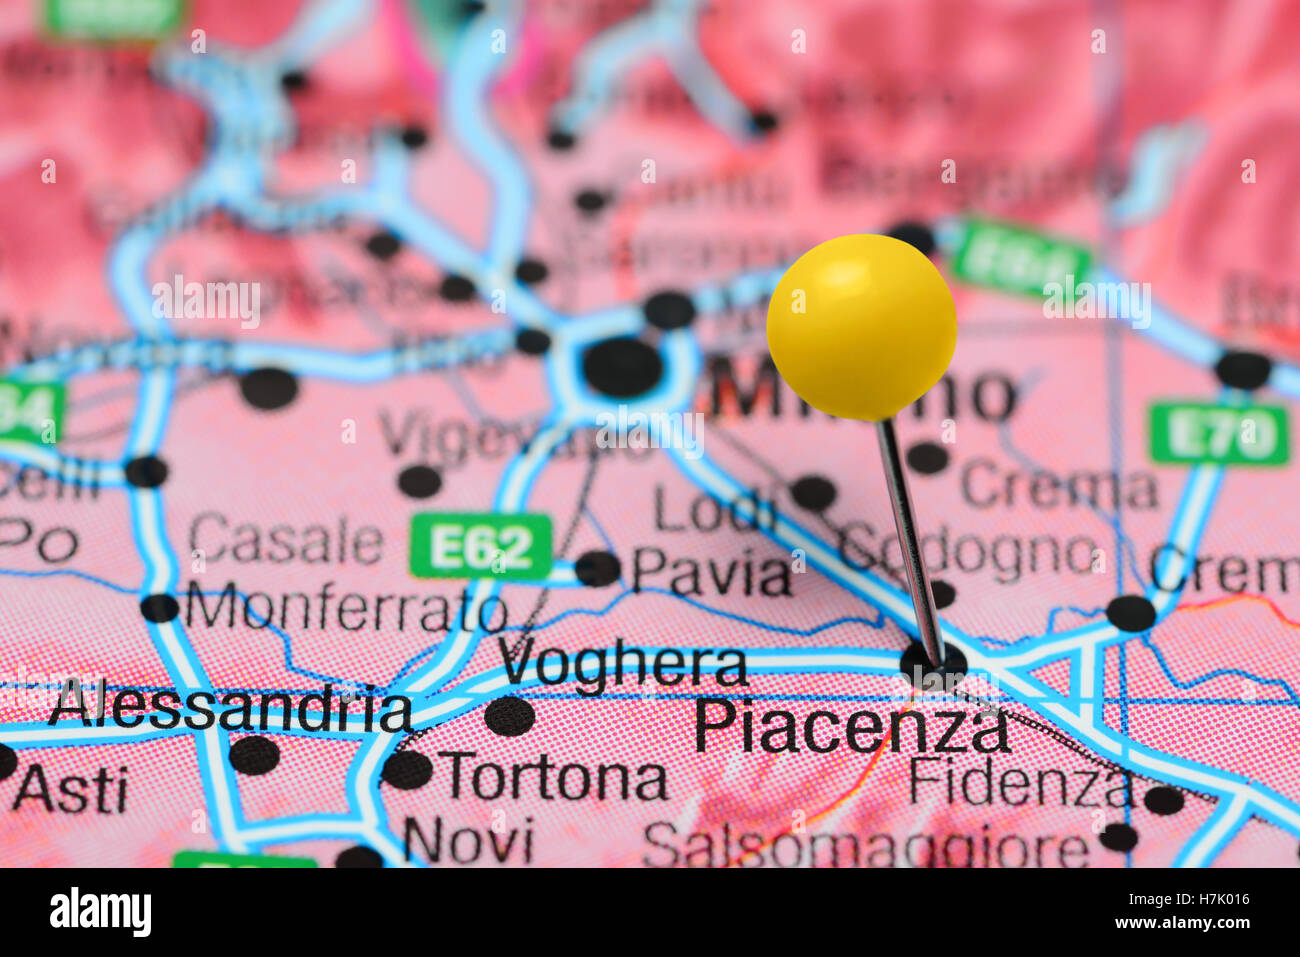 Piacenza pinned on a map of Italy Stock Photo